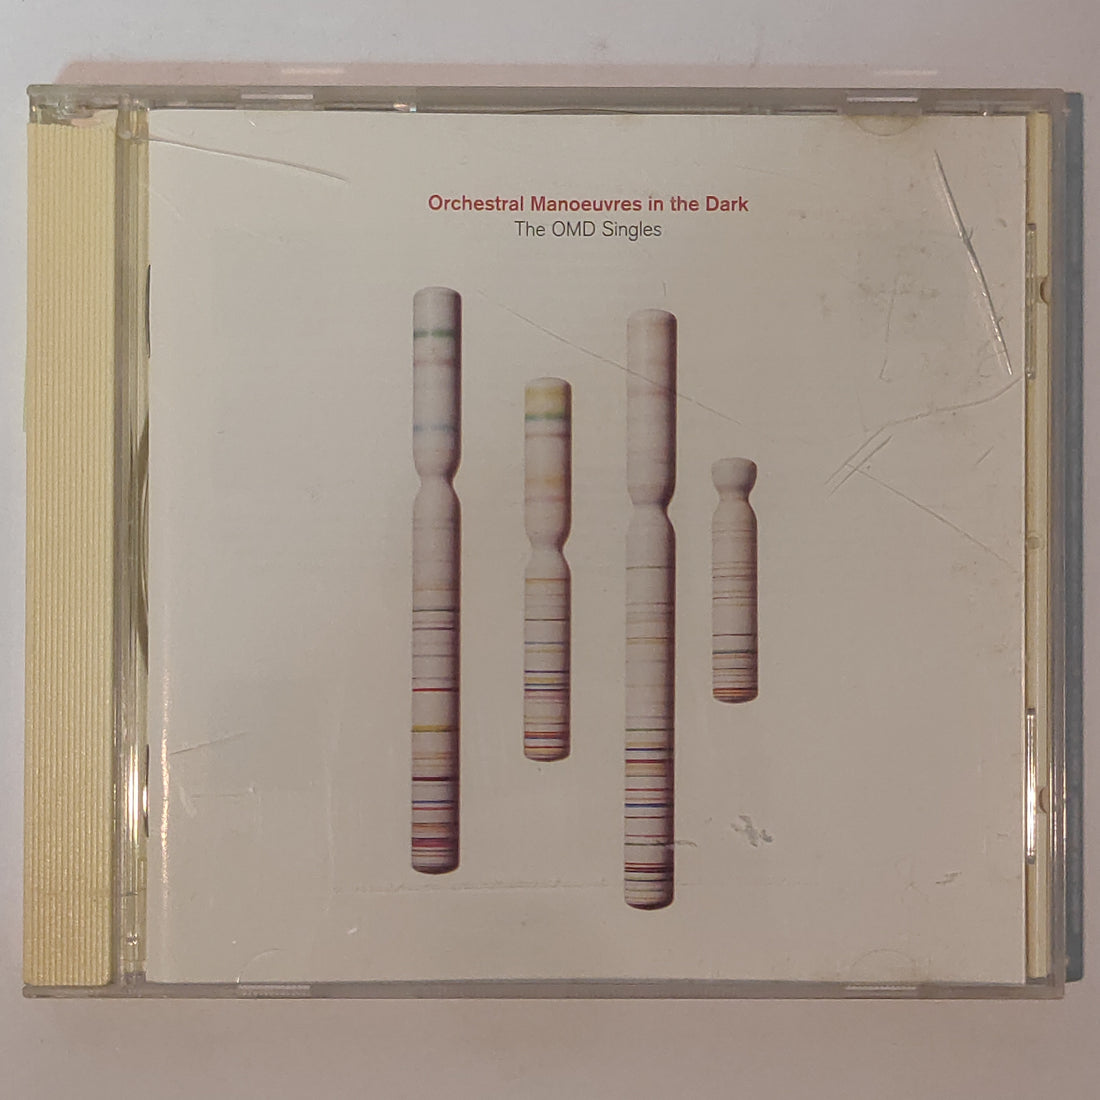 Orchestral Manoeuvres In The Dark - The OMD Singles (CD) (VG+)